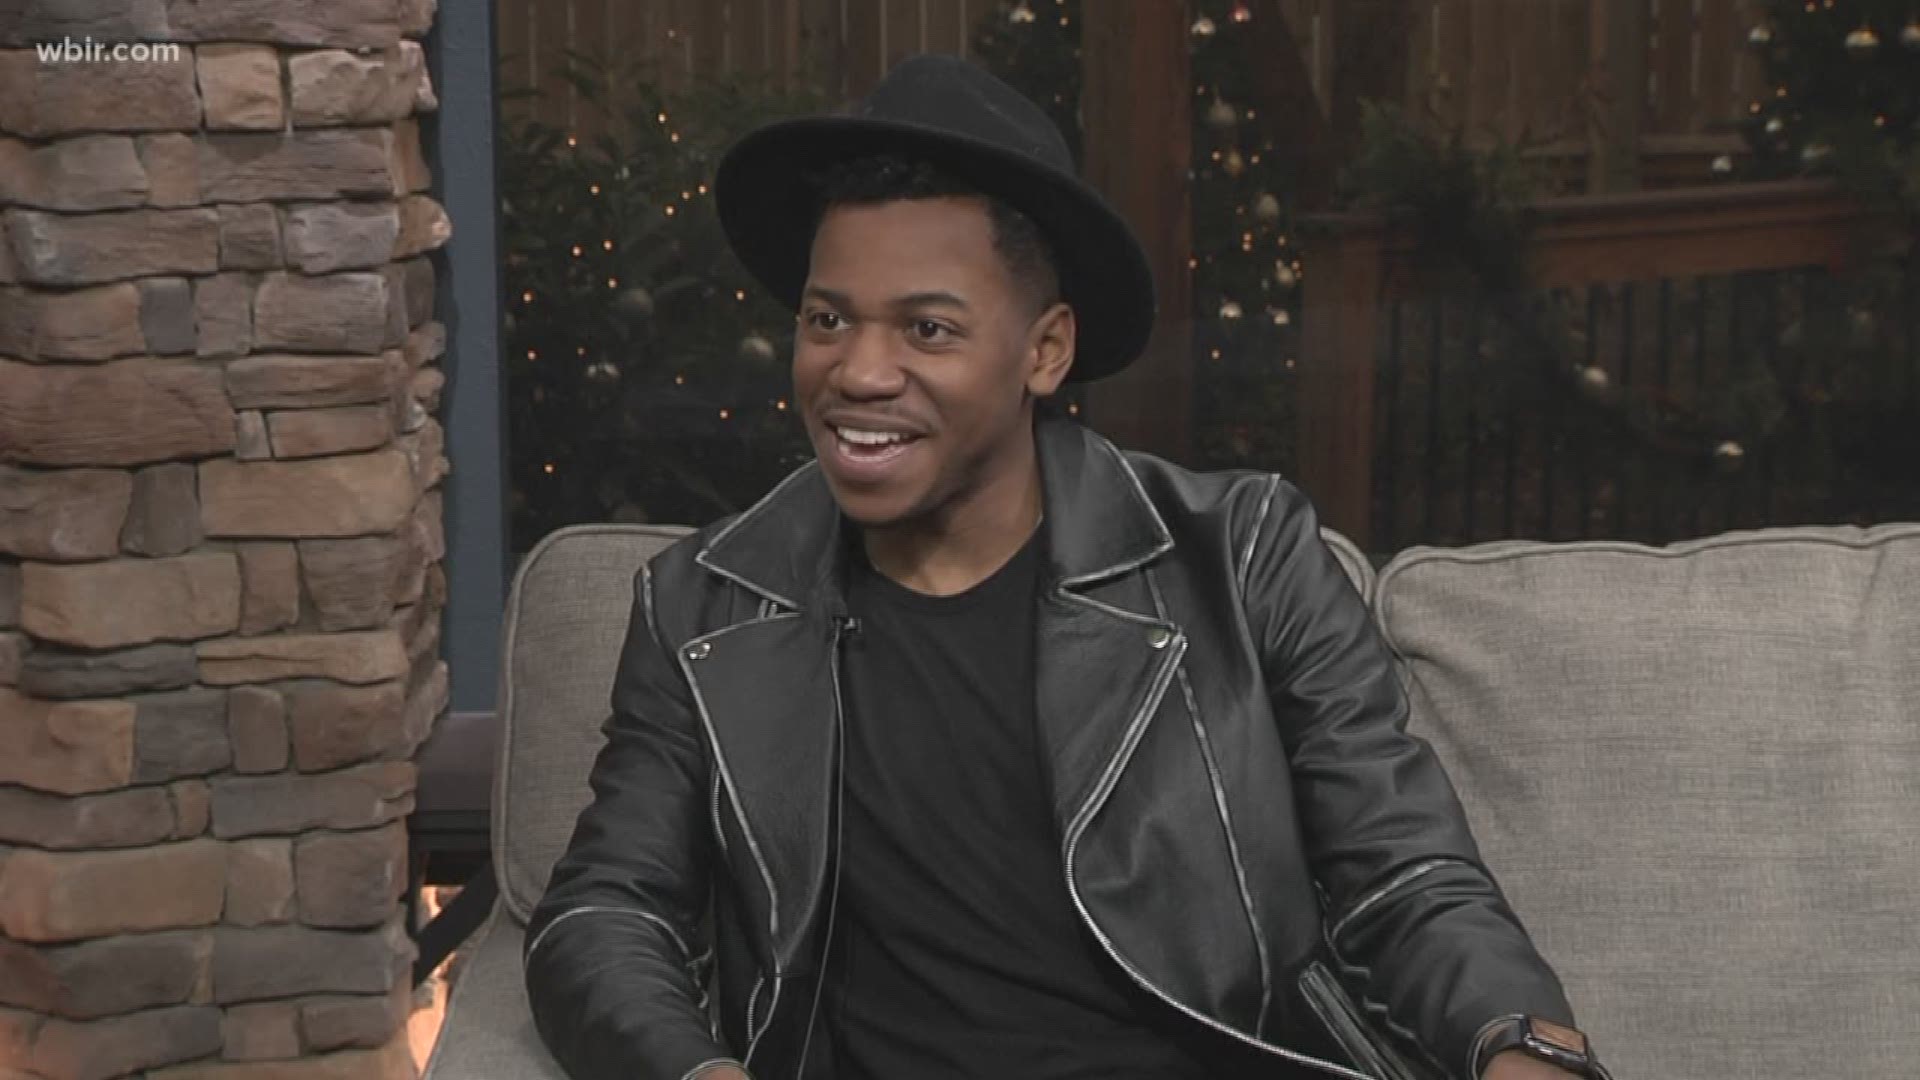 Chris Blue discusses his new single and his appearance on the finale of NBC's "The Voice"
December 13, 2017-4pm